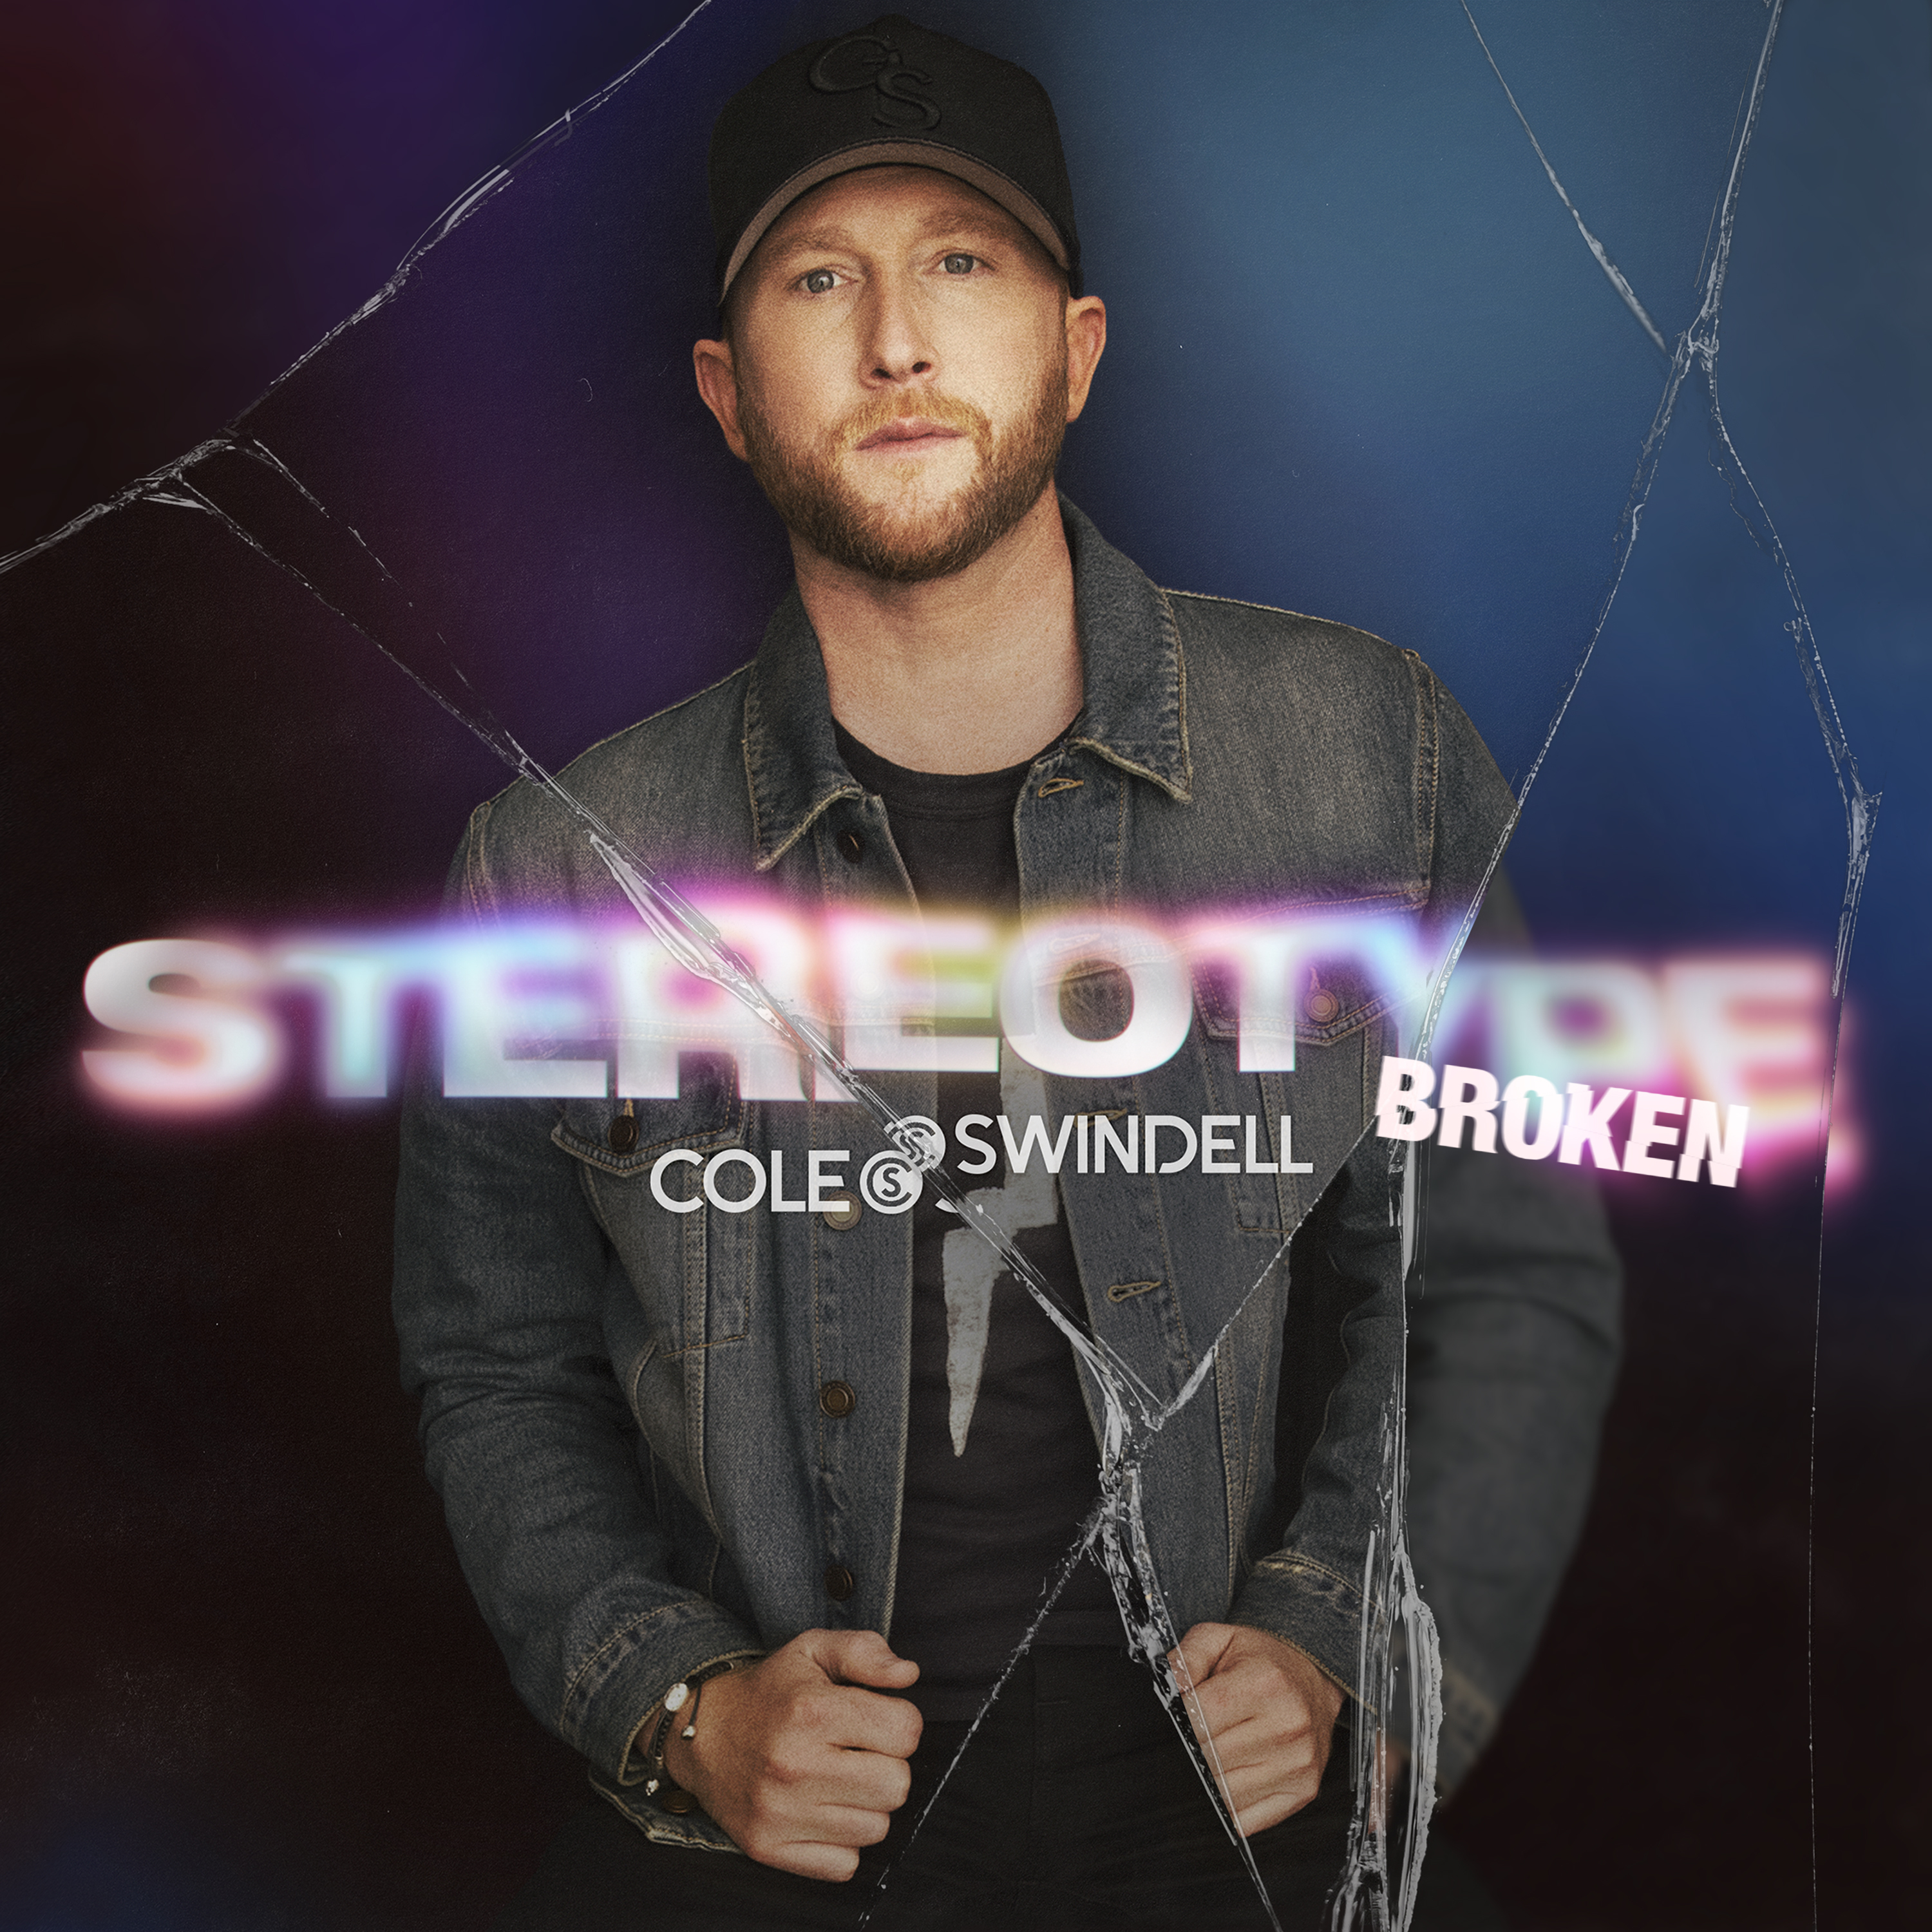 COLE SWINDELL RELEASES STEREOTYPE BROKEN DELUXE ALBUM FEAT. “SAD ASS COUNTRY SONG” TODAY